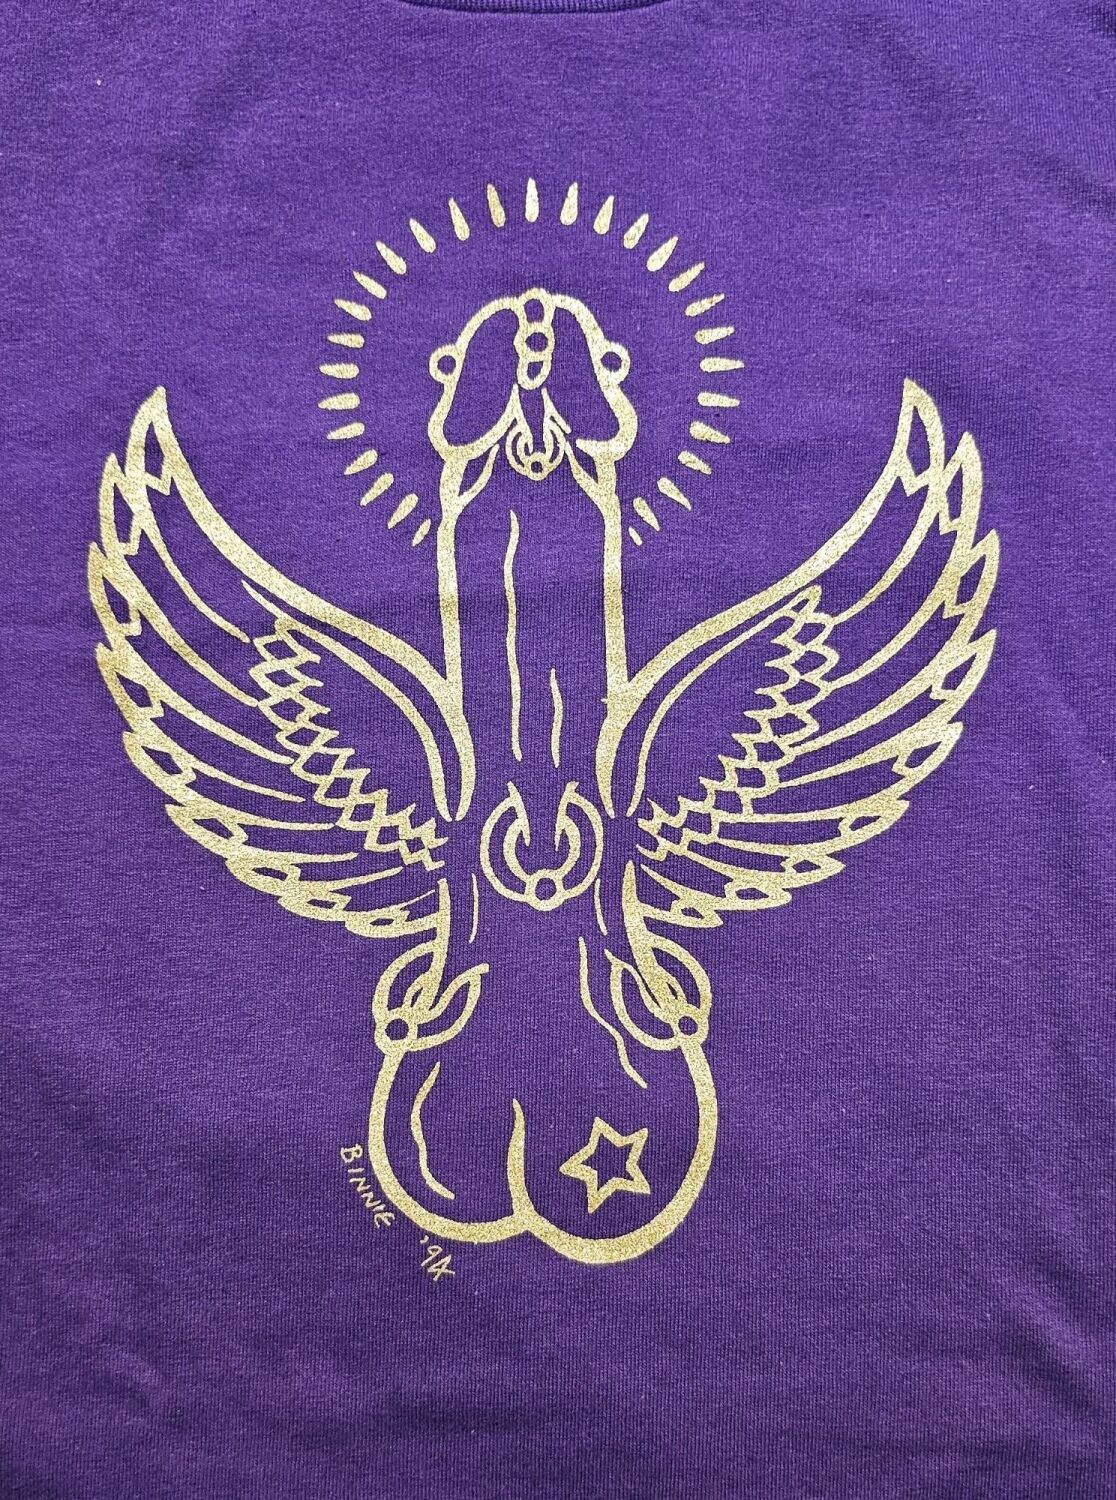 Iconic Flying cock Tee shirt  Gold on purple size L